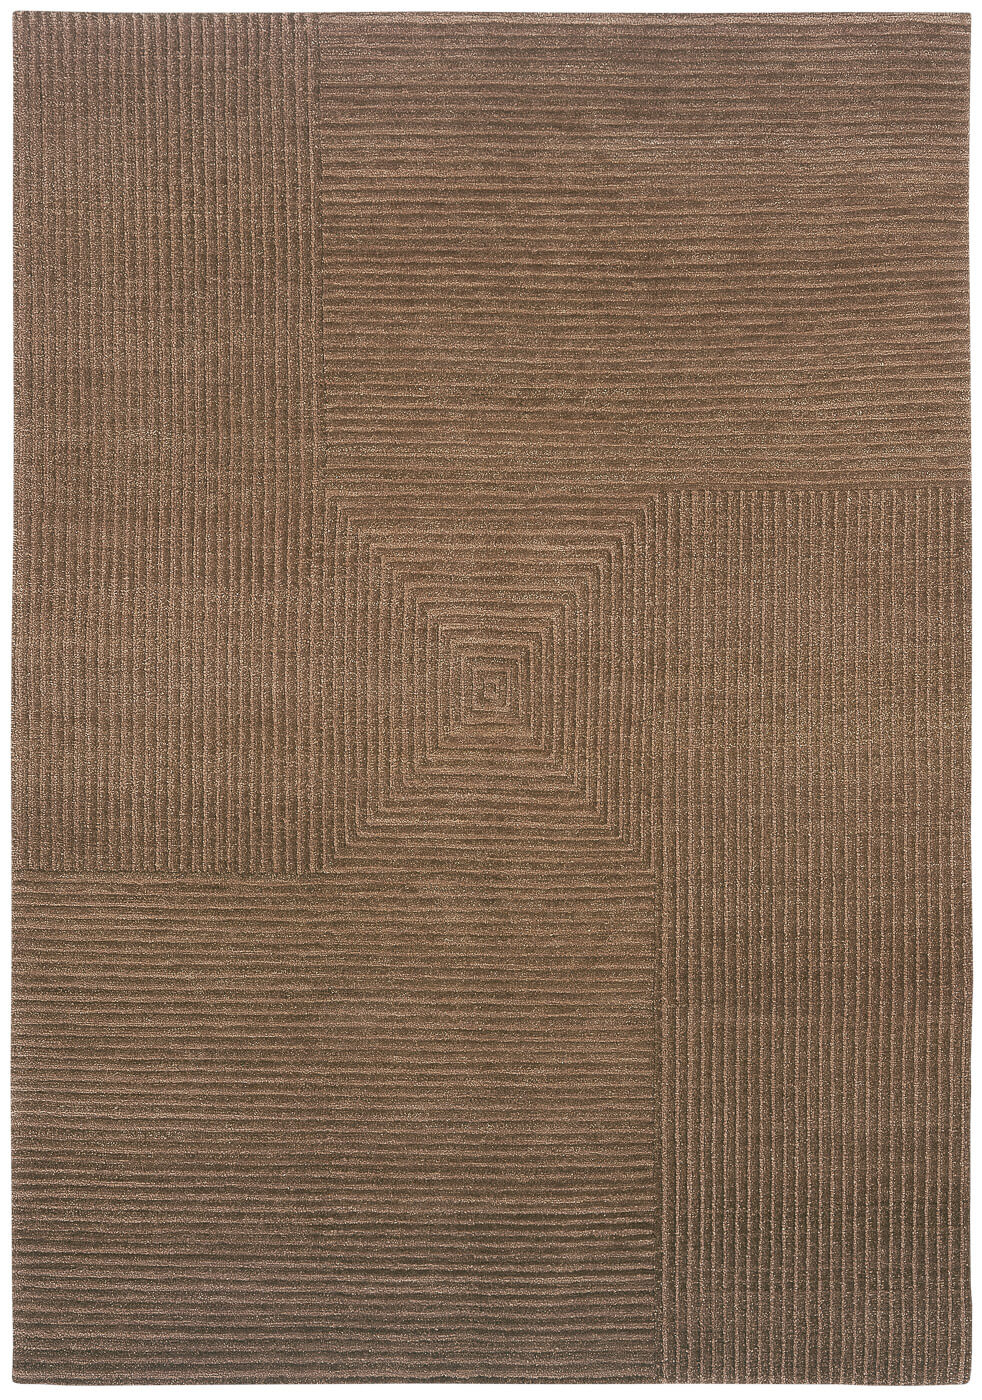 Hand-woven Red Luxury Rug ☞ Size: 300 x 400 cm